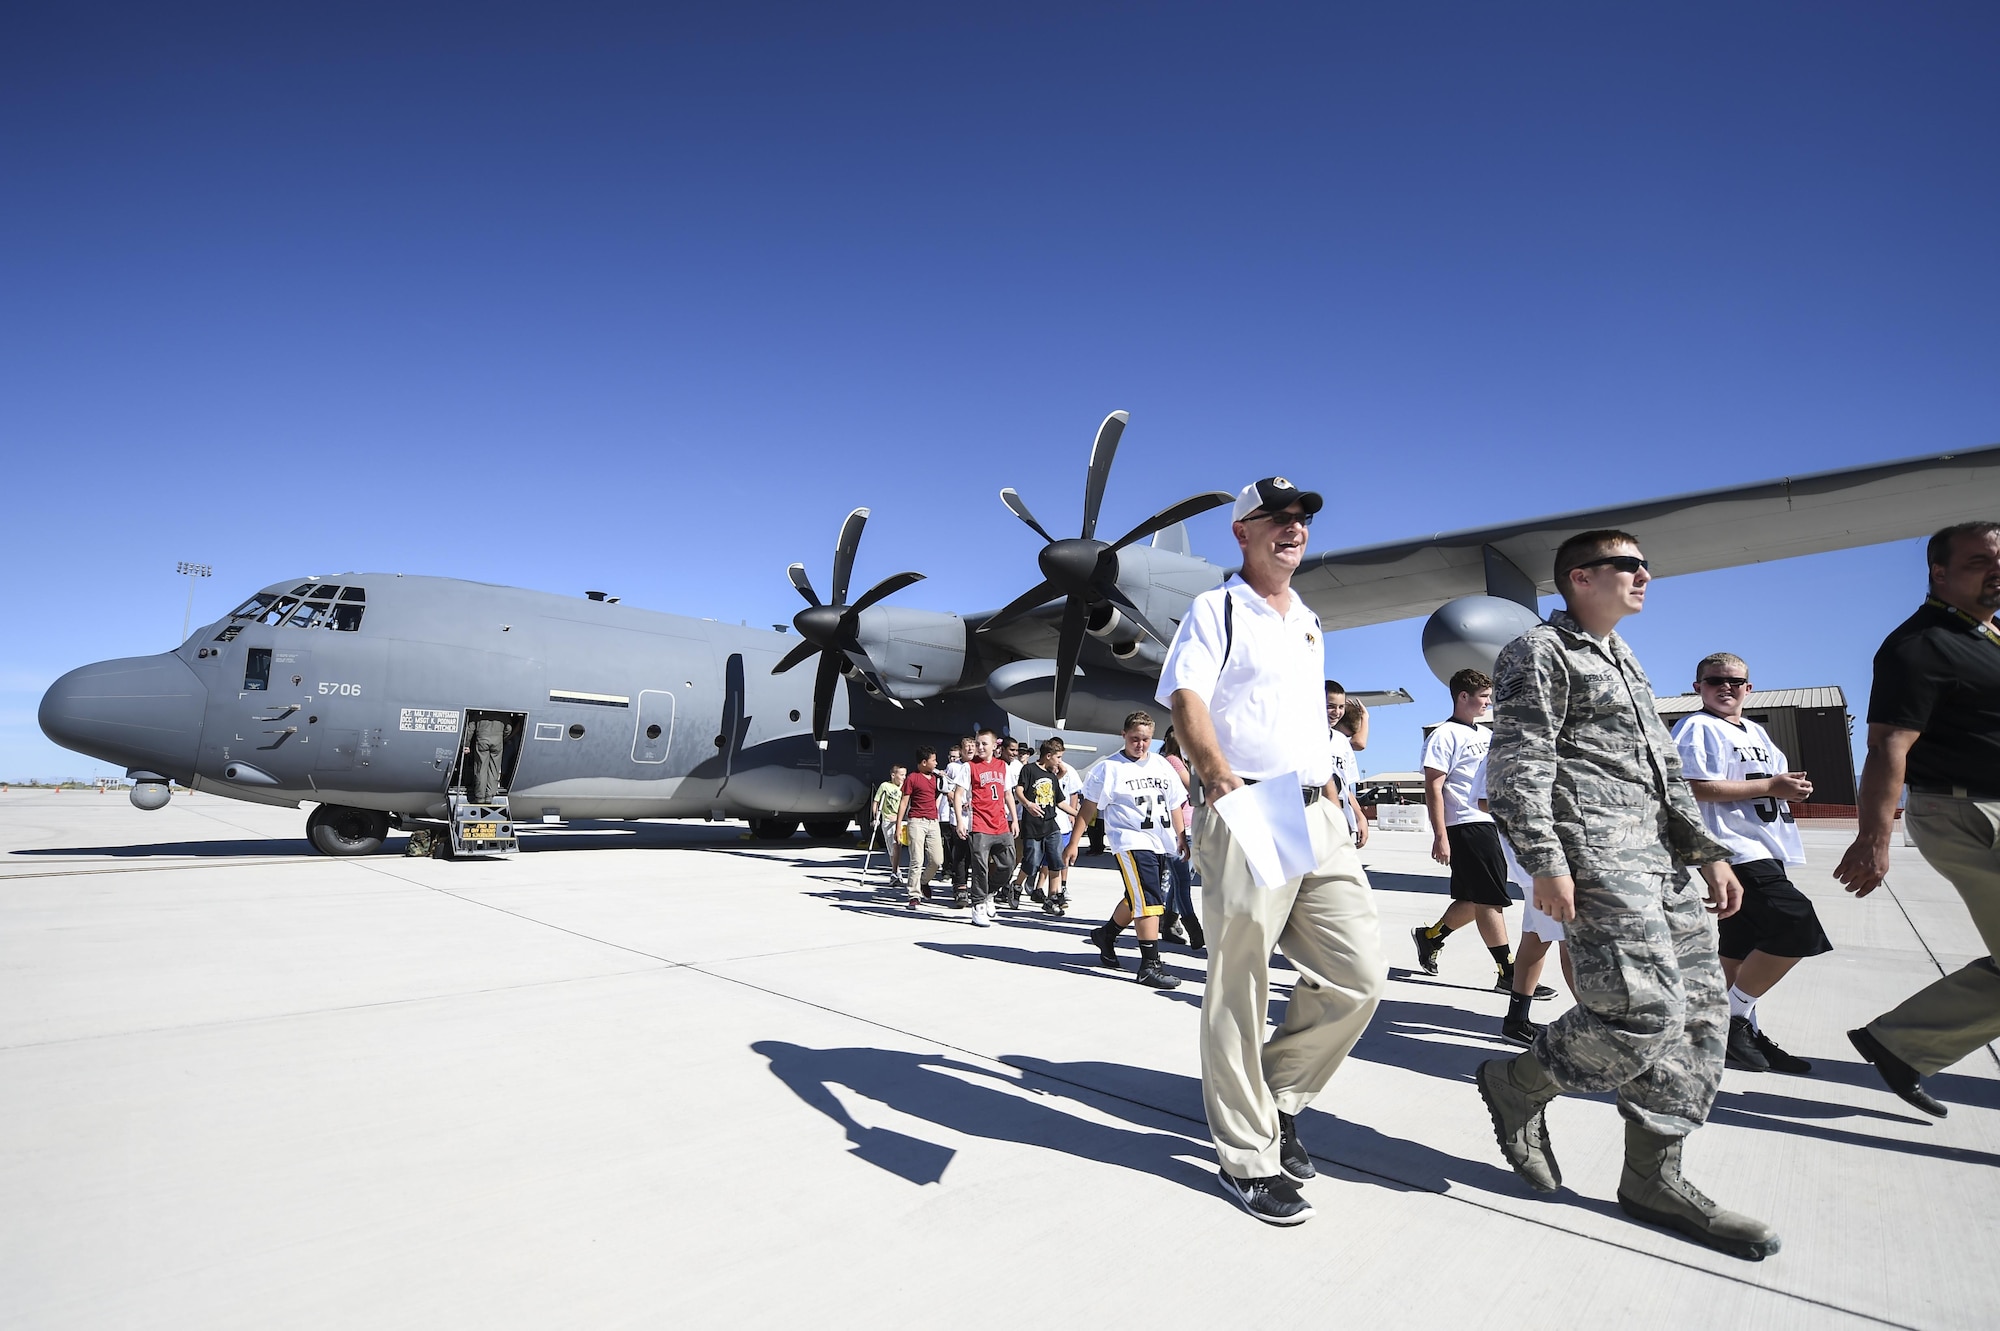 Students and teachers tour a static display of a C130 during the fourth annual New Mexico Aviation Aerospace Association Career Expo Oct. 6, 2016 at Holloman Air Force Base N.M. About 2,500 middle school through college-level students from across New Mexico came out to learn about the science, technology, engineering and mathematics fields. The goal of STEM is to motivate and educate students by giving them a taste of what aviation and aerospace engineering is all about. These STEM events also get the students talking to people who are working directly in STEM industries.  (U.S. Air Force photo by Staff Sgt. Stacy Jonsgaard)